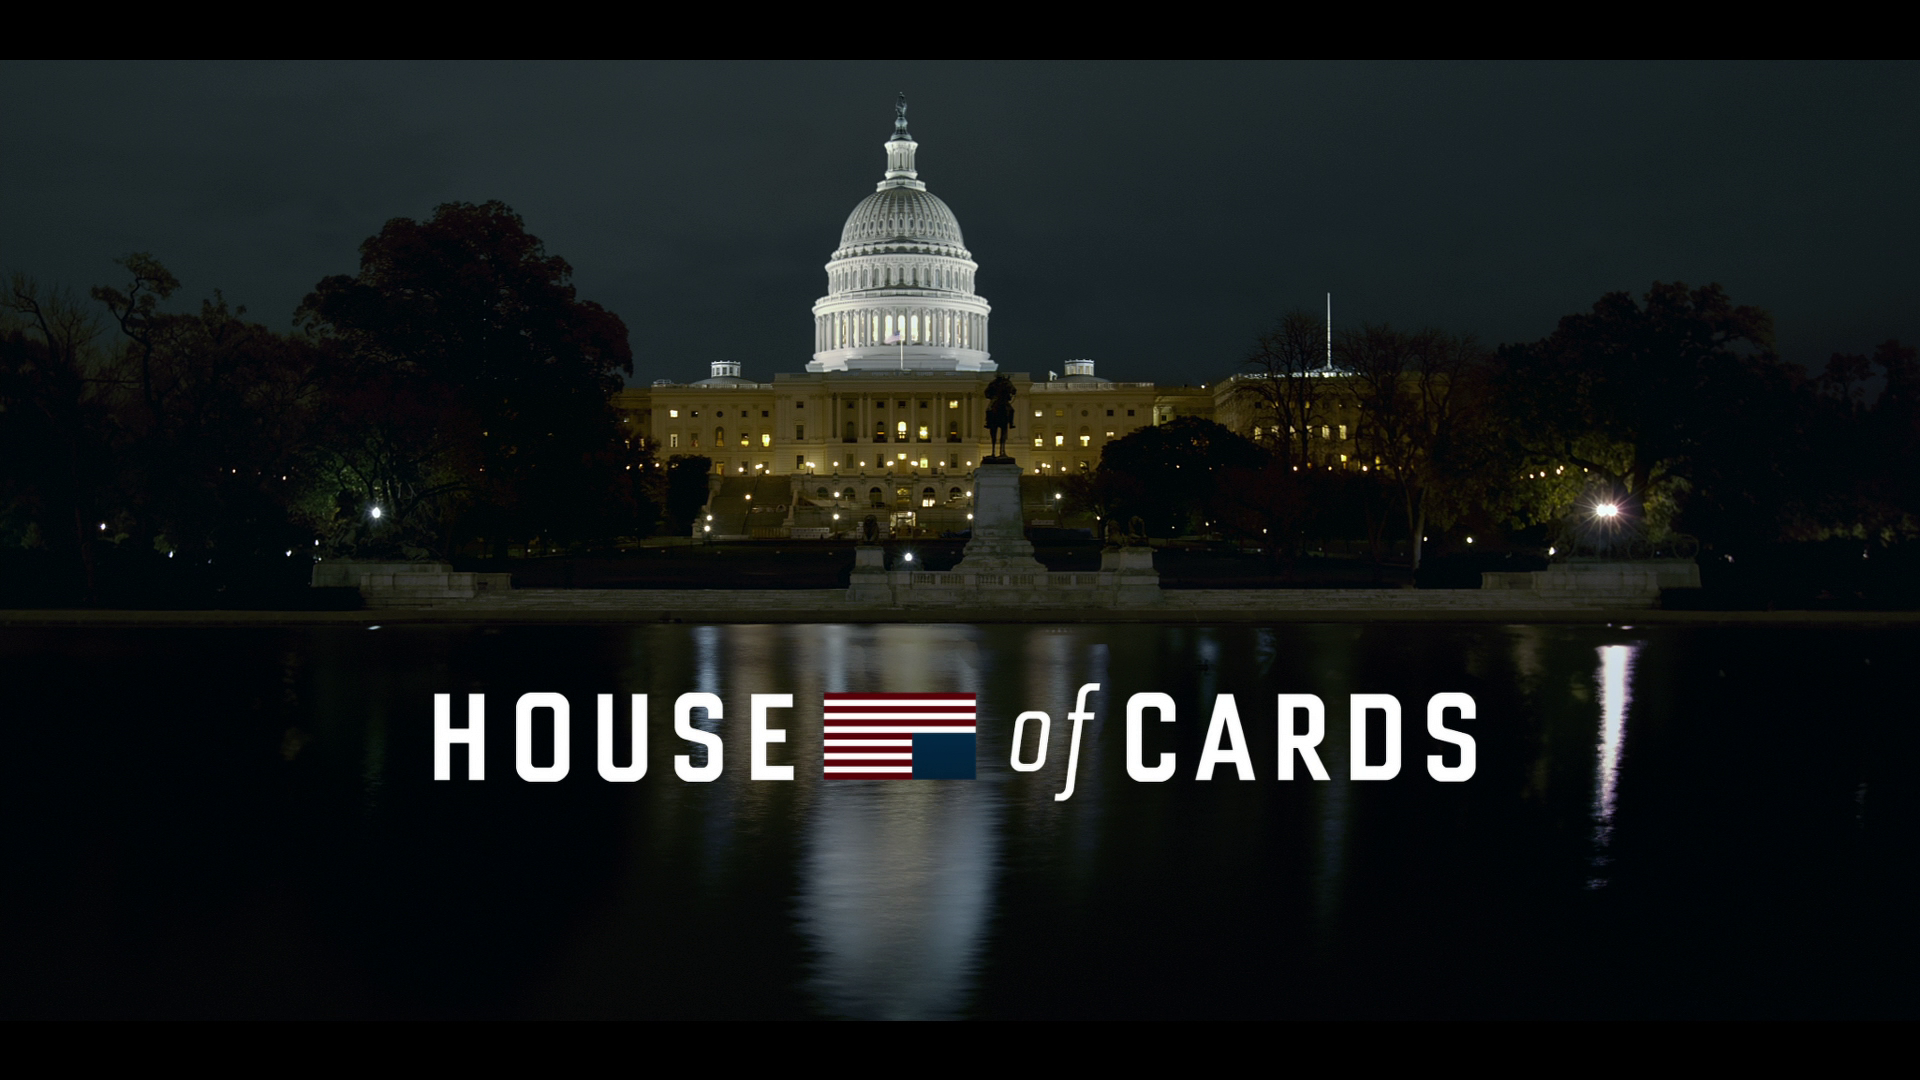 House Of Cards Computer Wallpapers Desktop Backgrounds 1920x1080 1920x1080